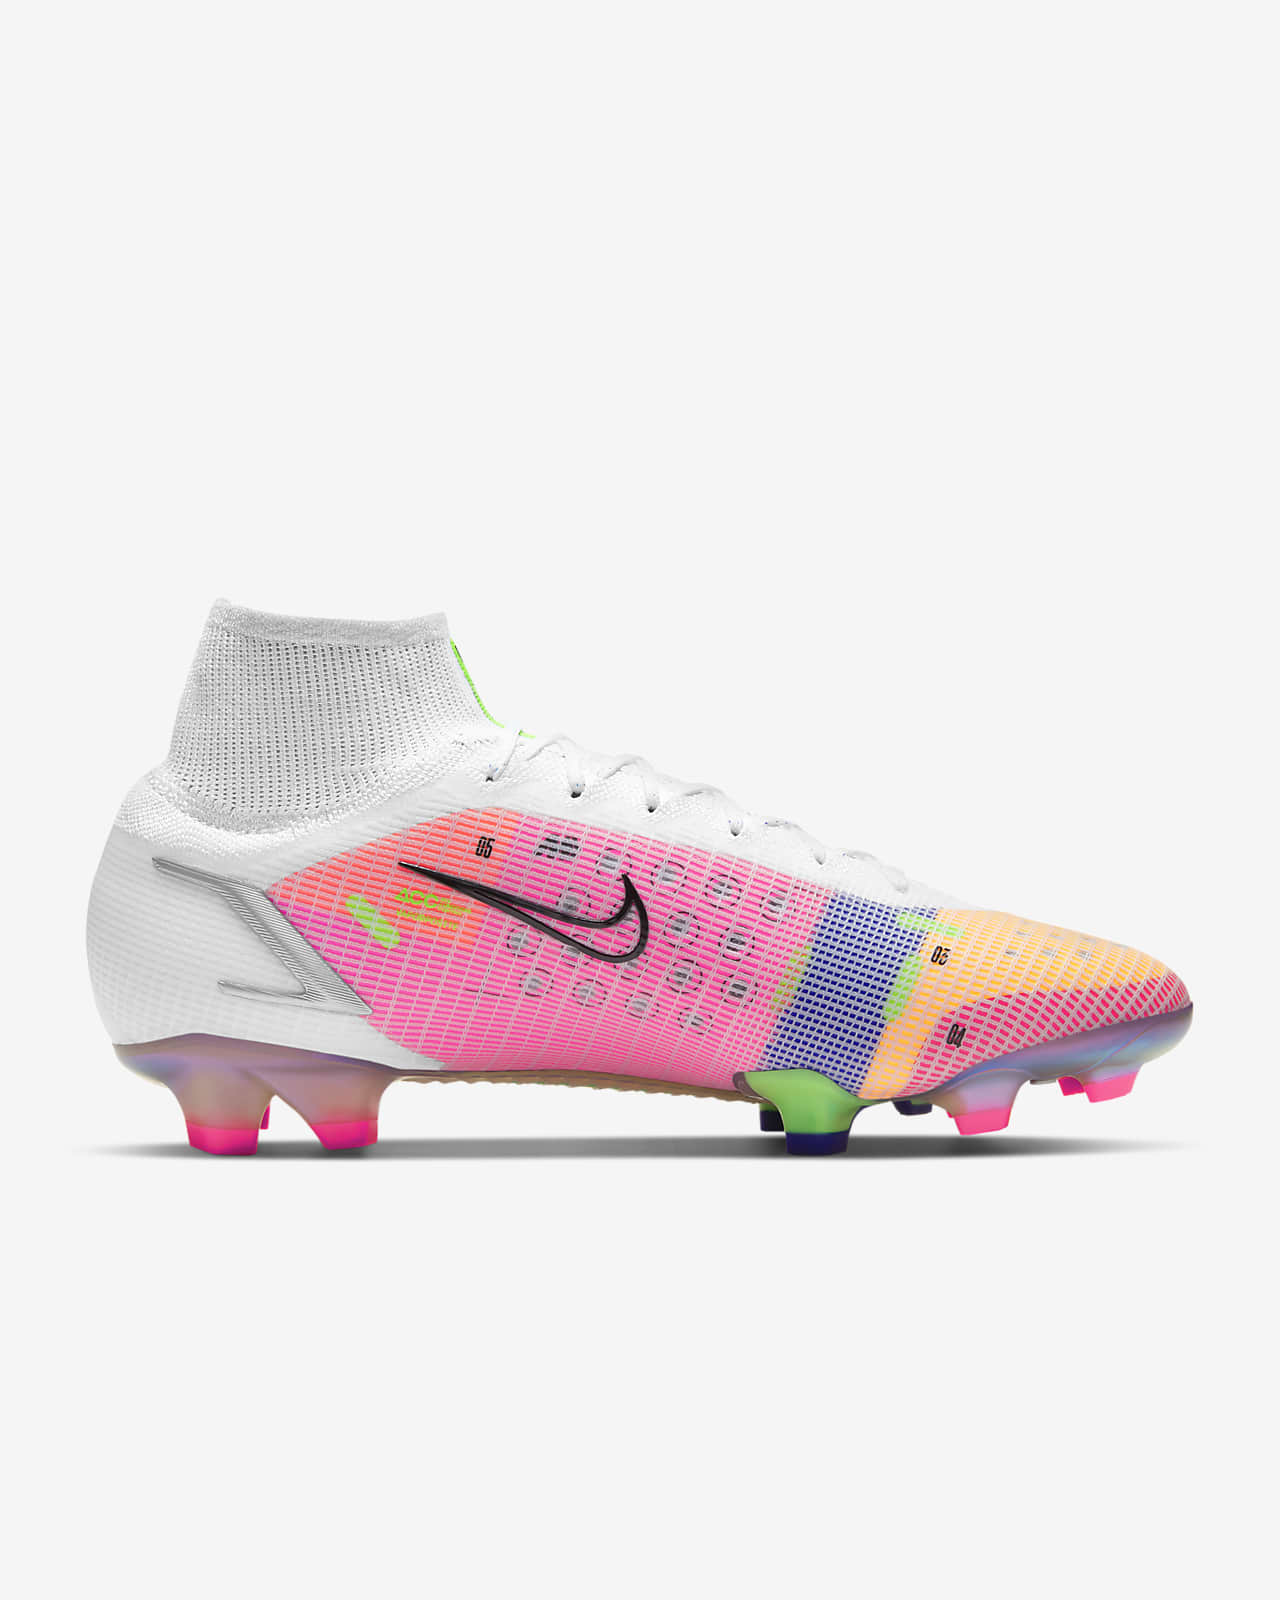 new superfly cleats